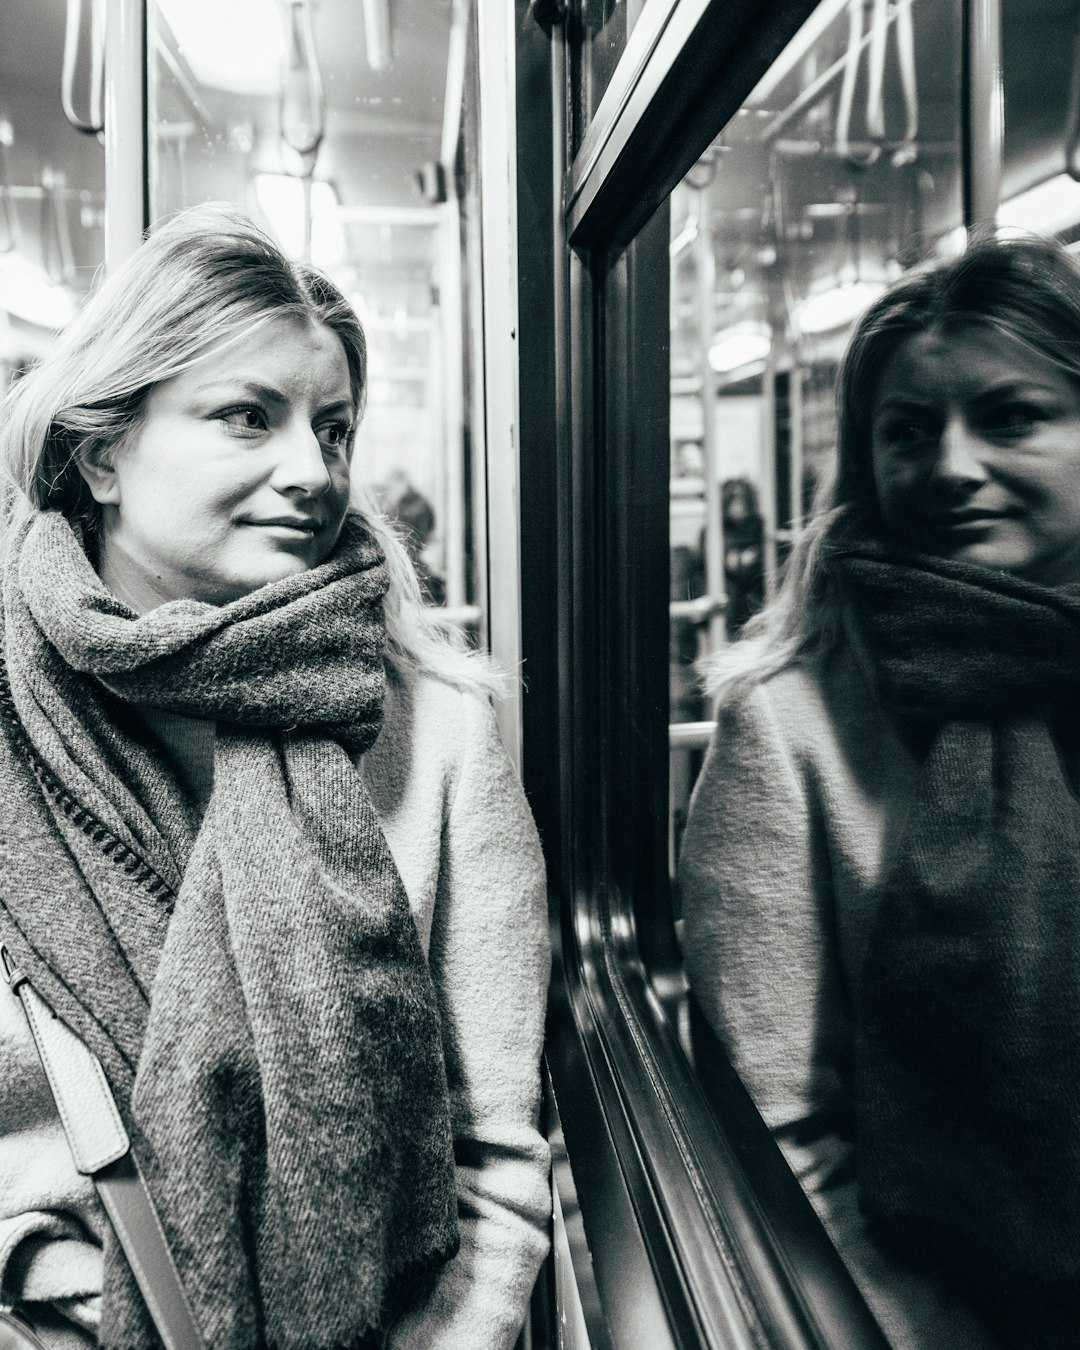 grayscale photography of woman inside train